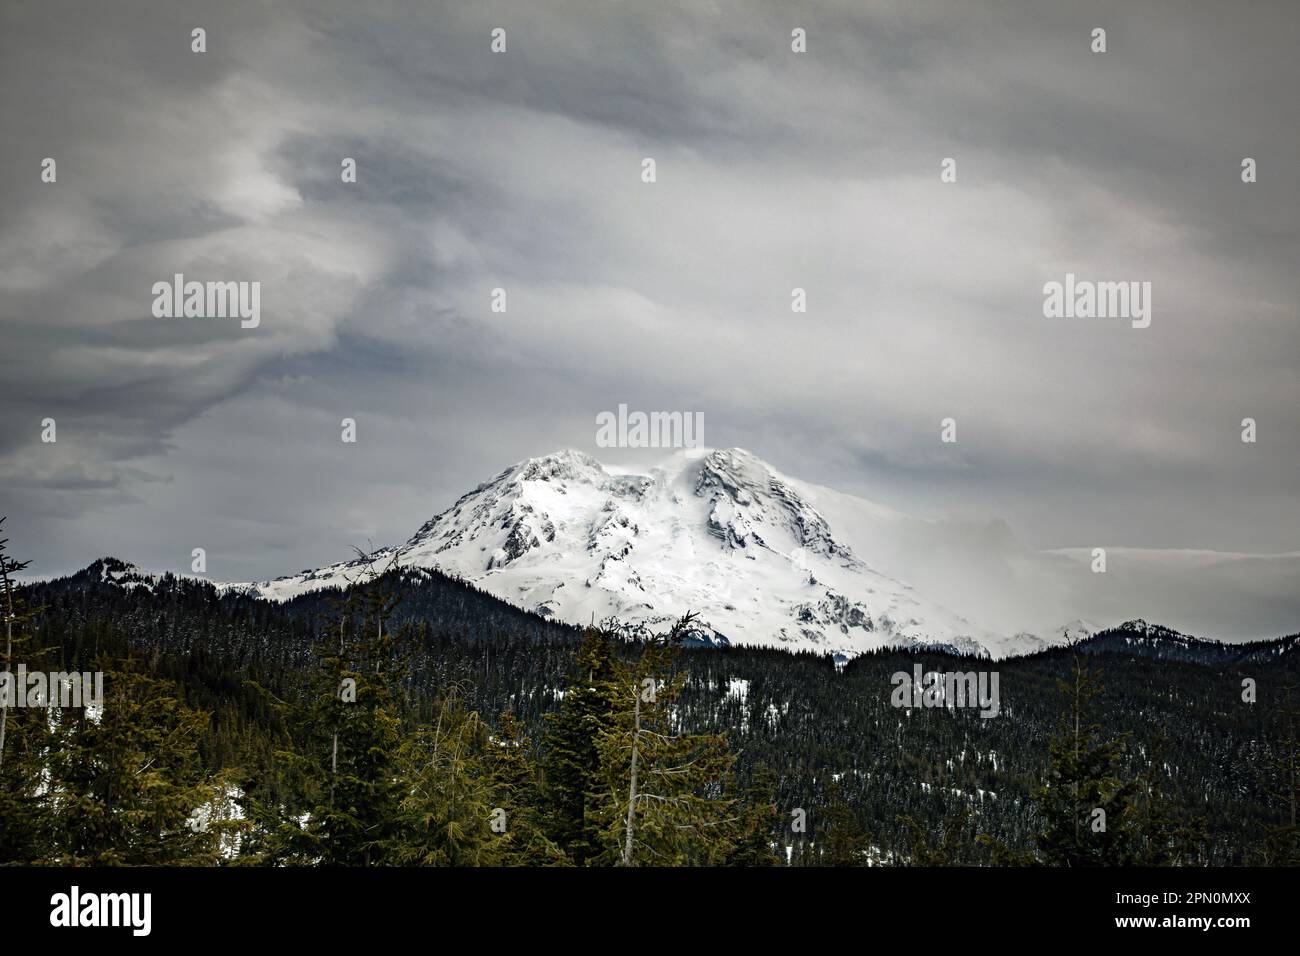 WA23353-00...WASHINGTON  - Mount Rainier viewed from the Mountain Vista Point in the northern unit of the Mount Tahoma Trails. Stock Photo